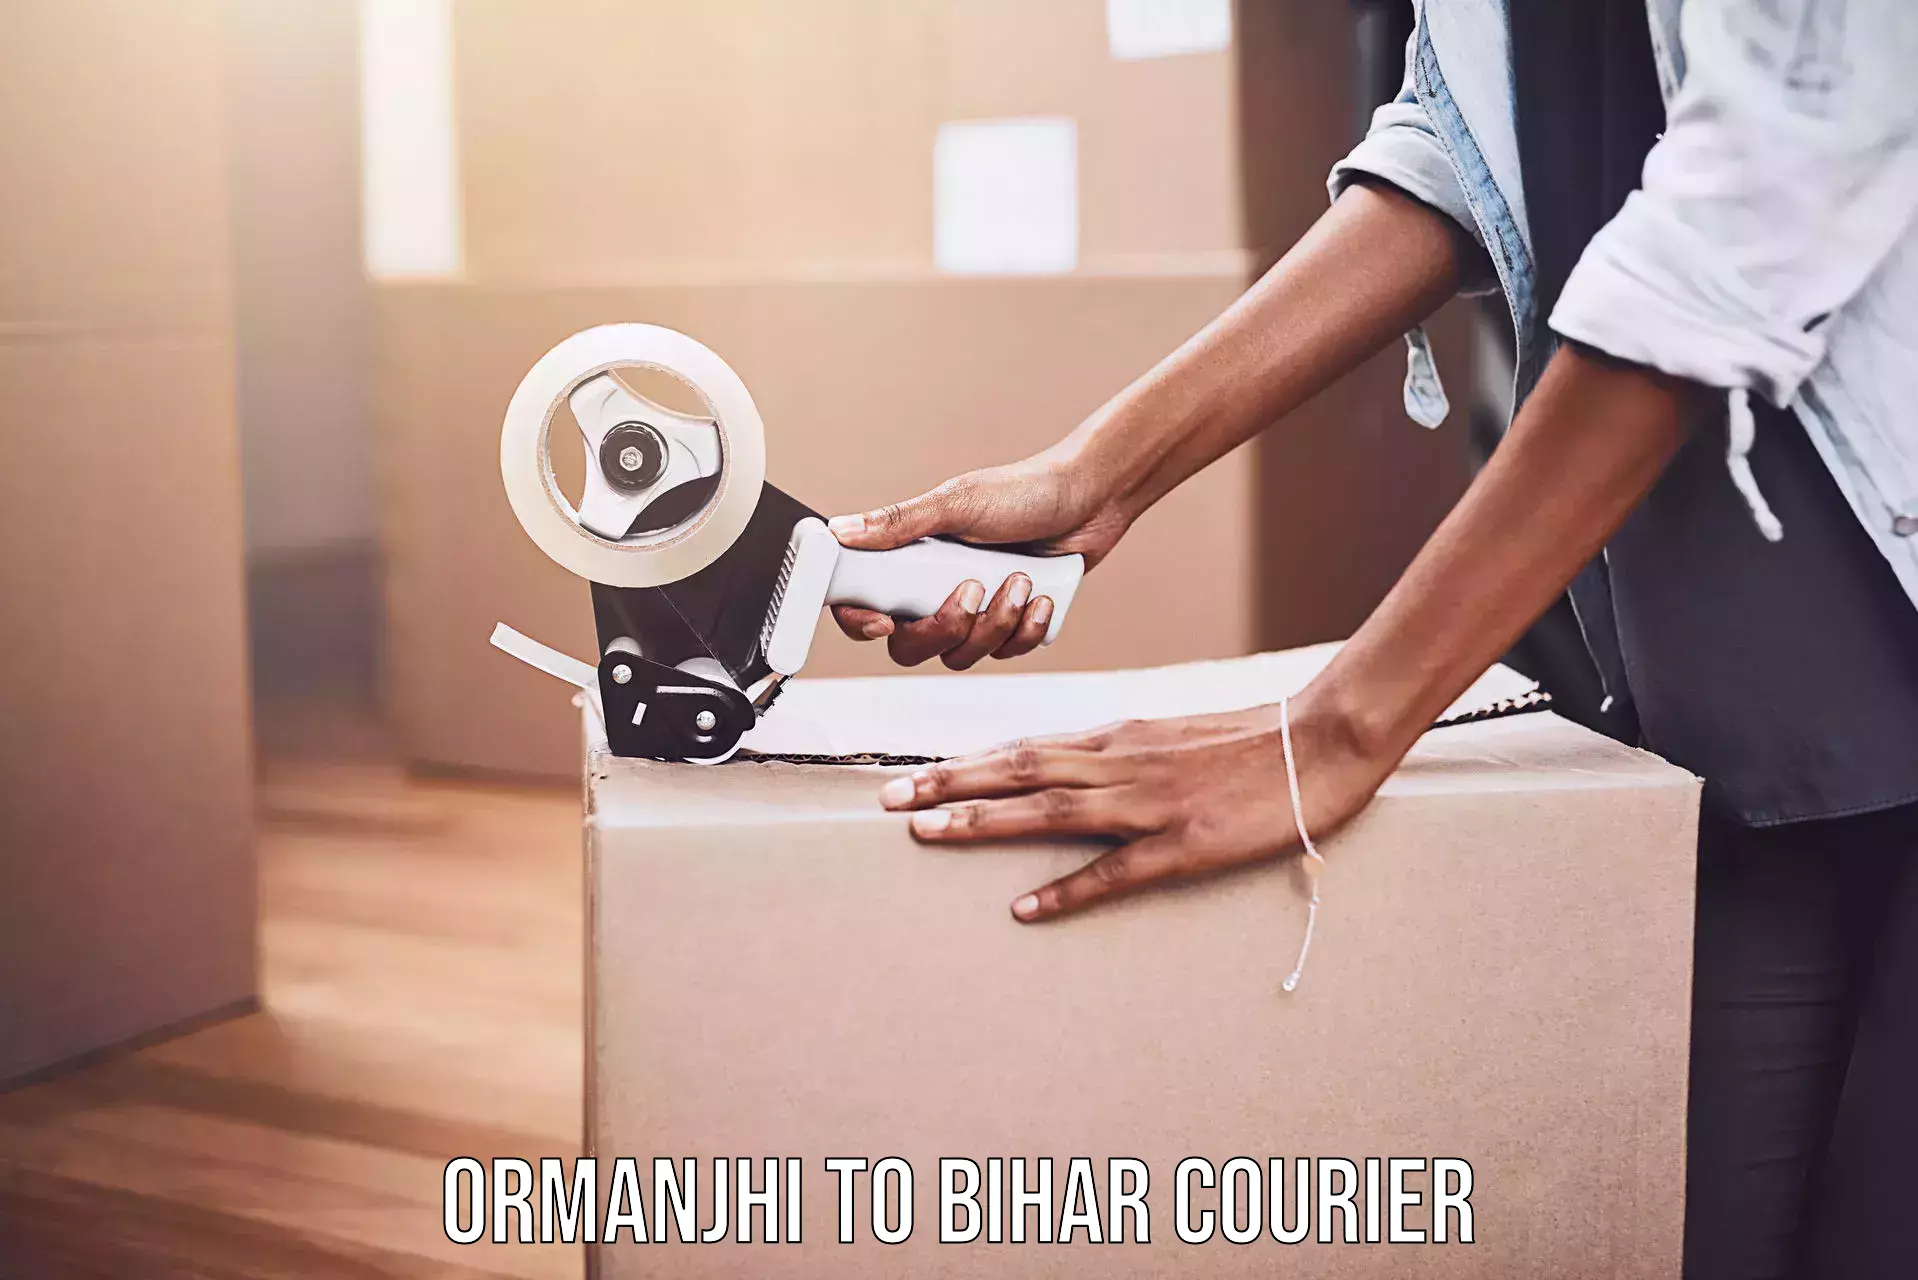 Courier service booking Ormanjhi to Bihar